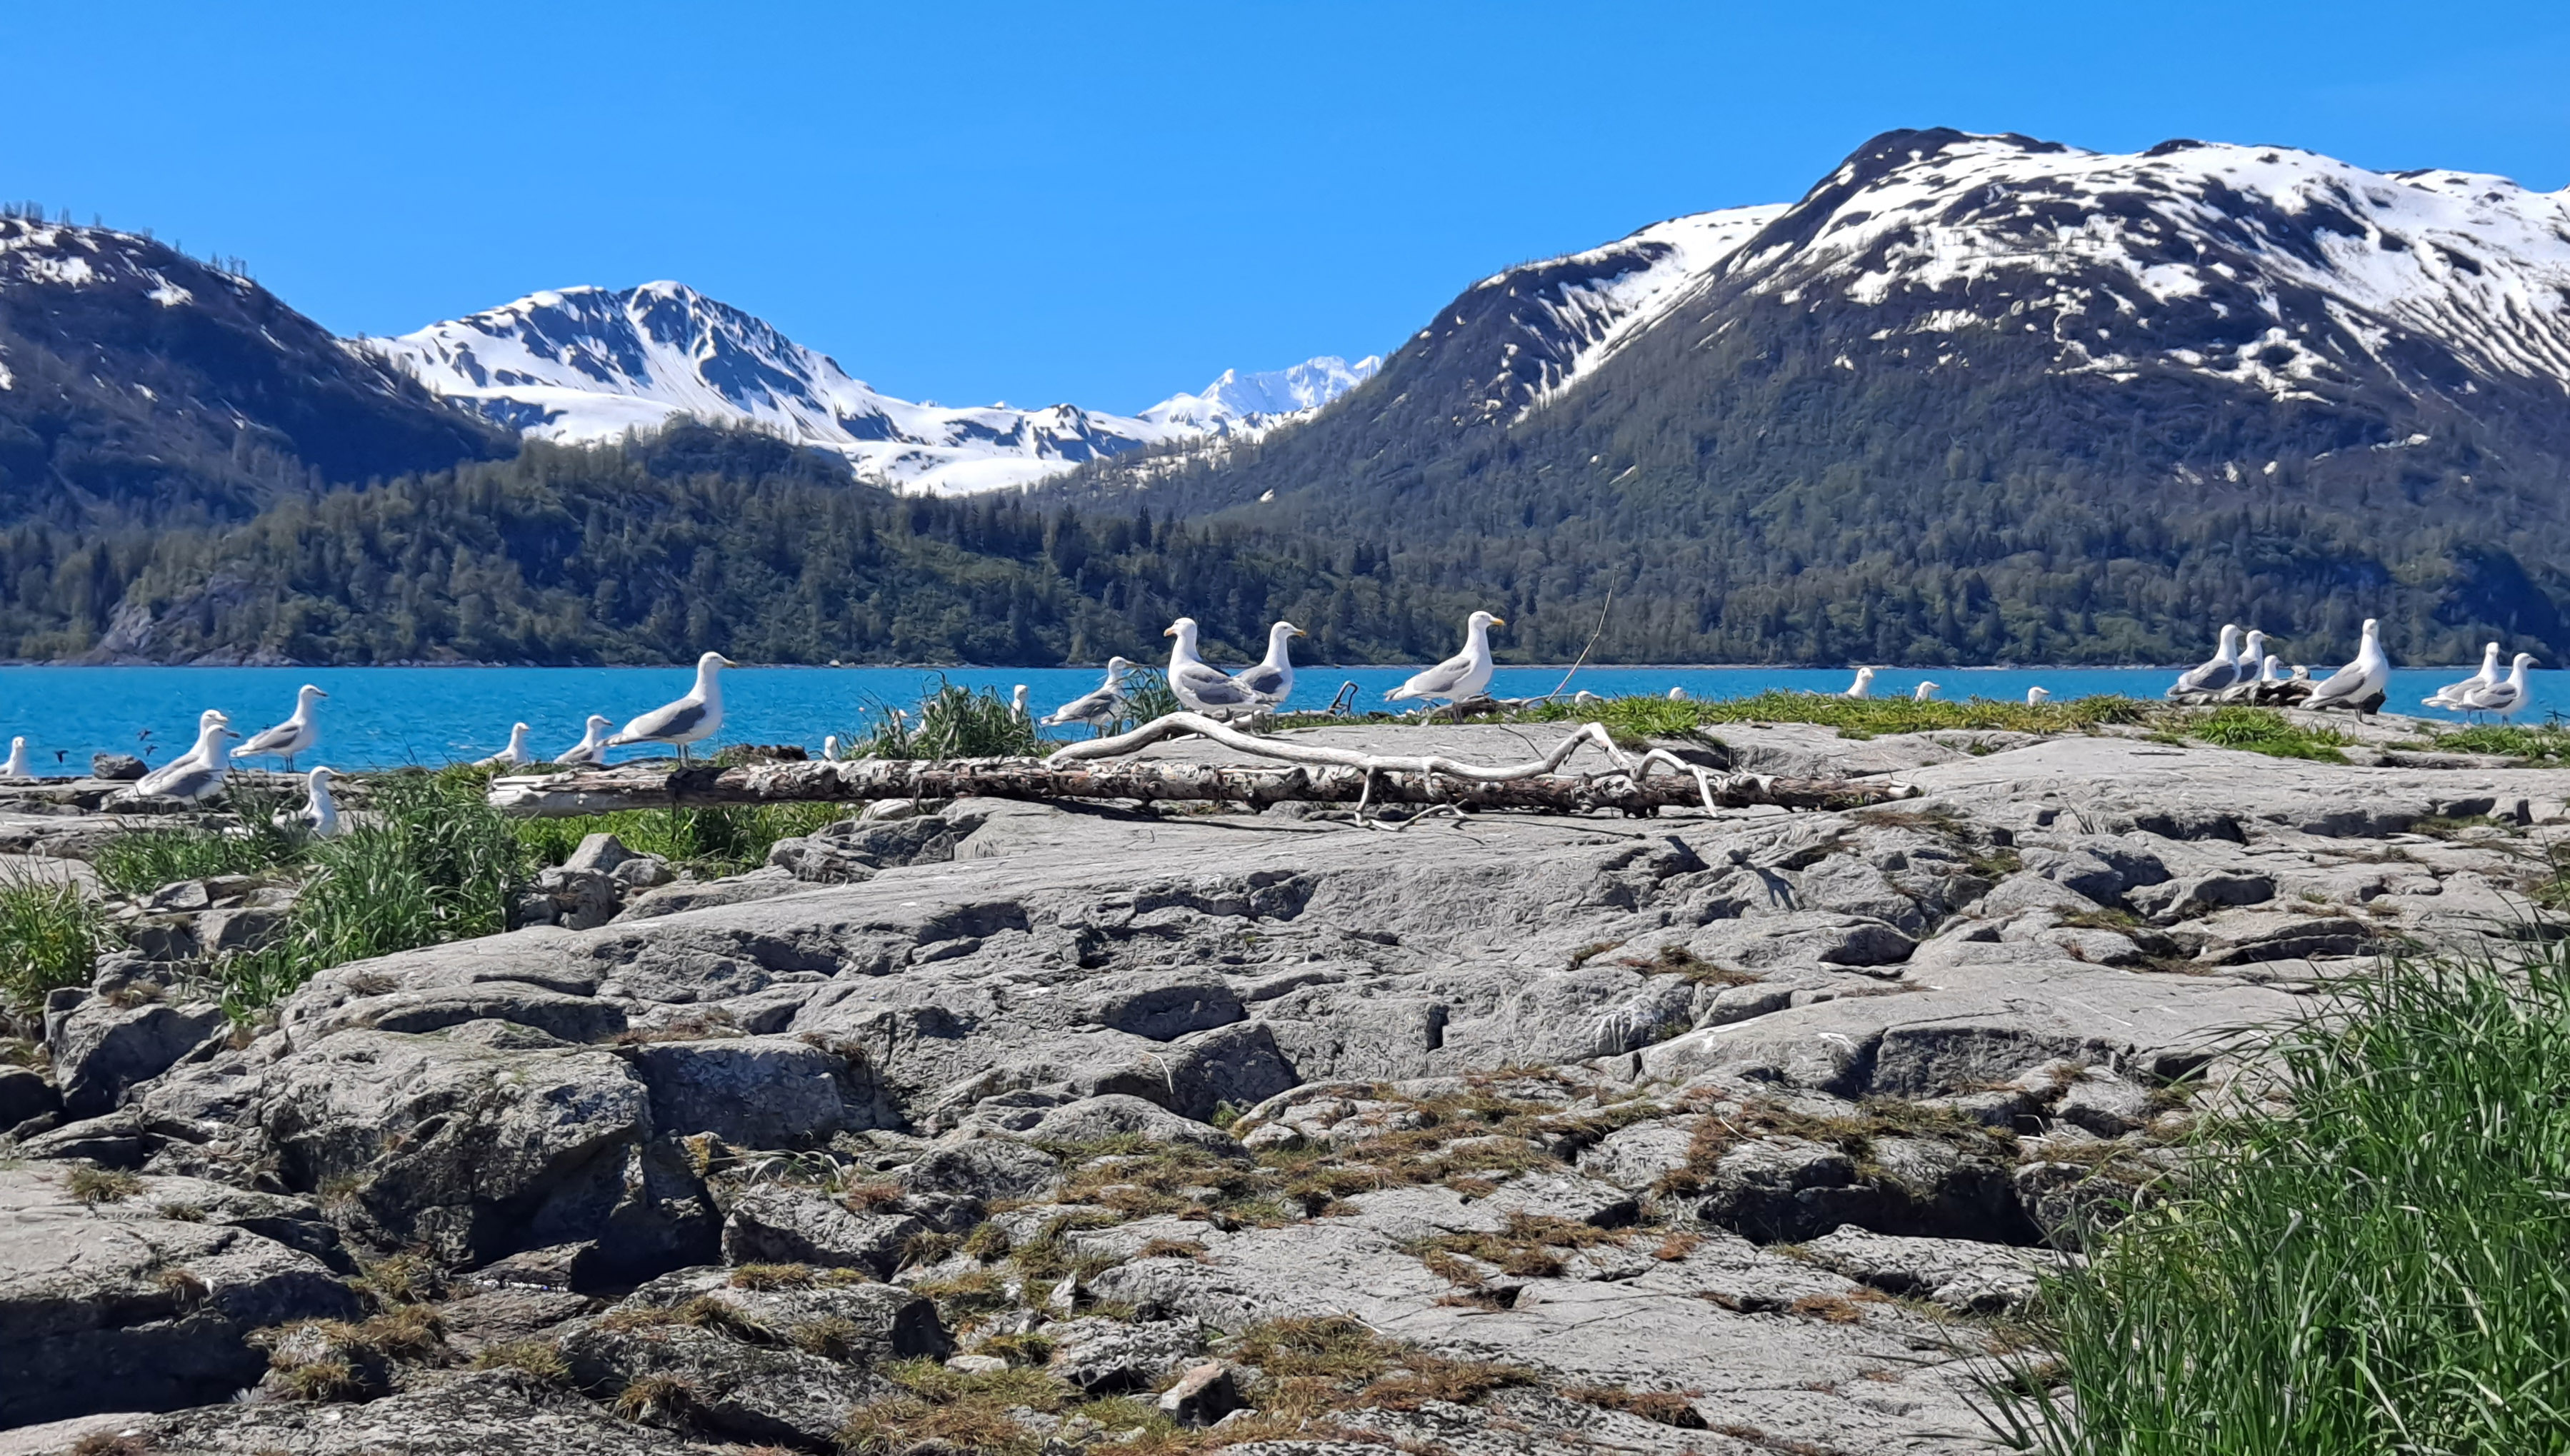 Glaucous winged gulls on a rocky outcropping of an island with sparse vegetation. Blue water and snowy mountains form the backdrop.